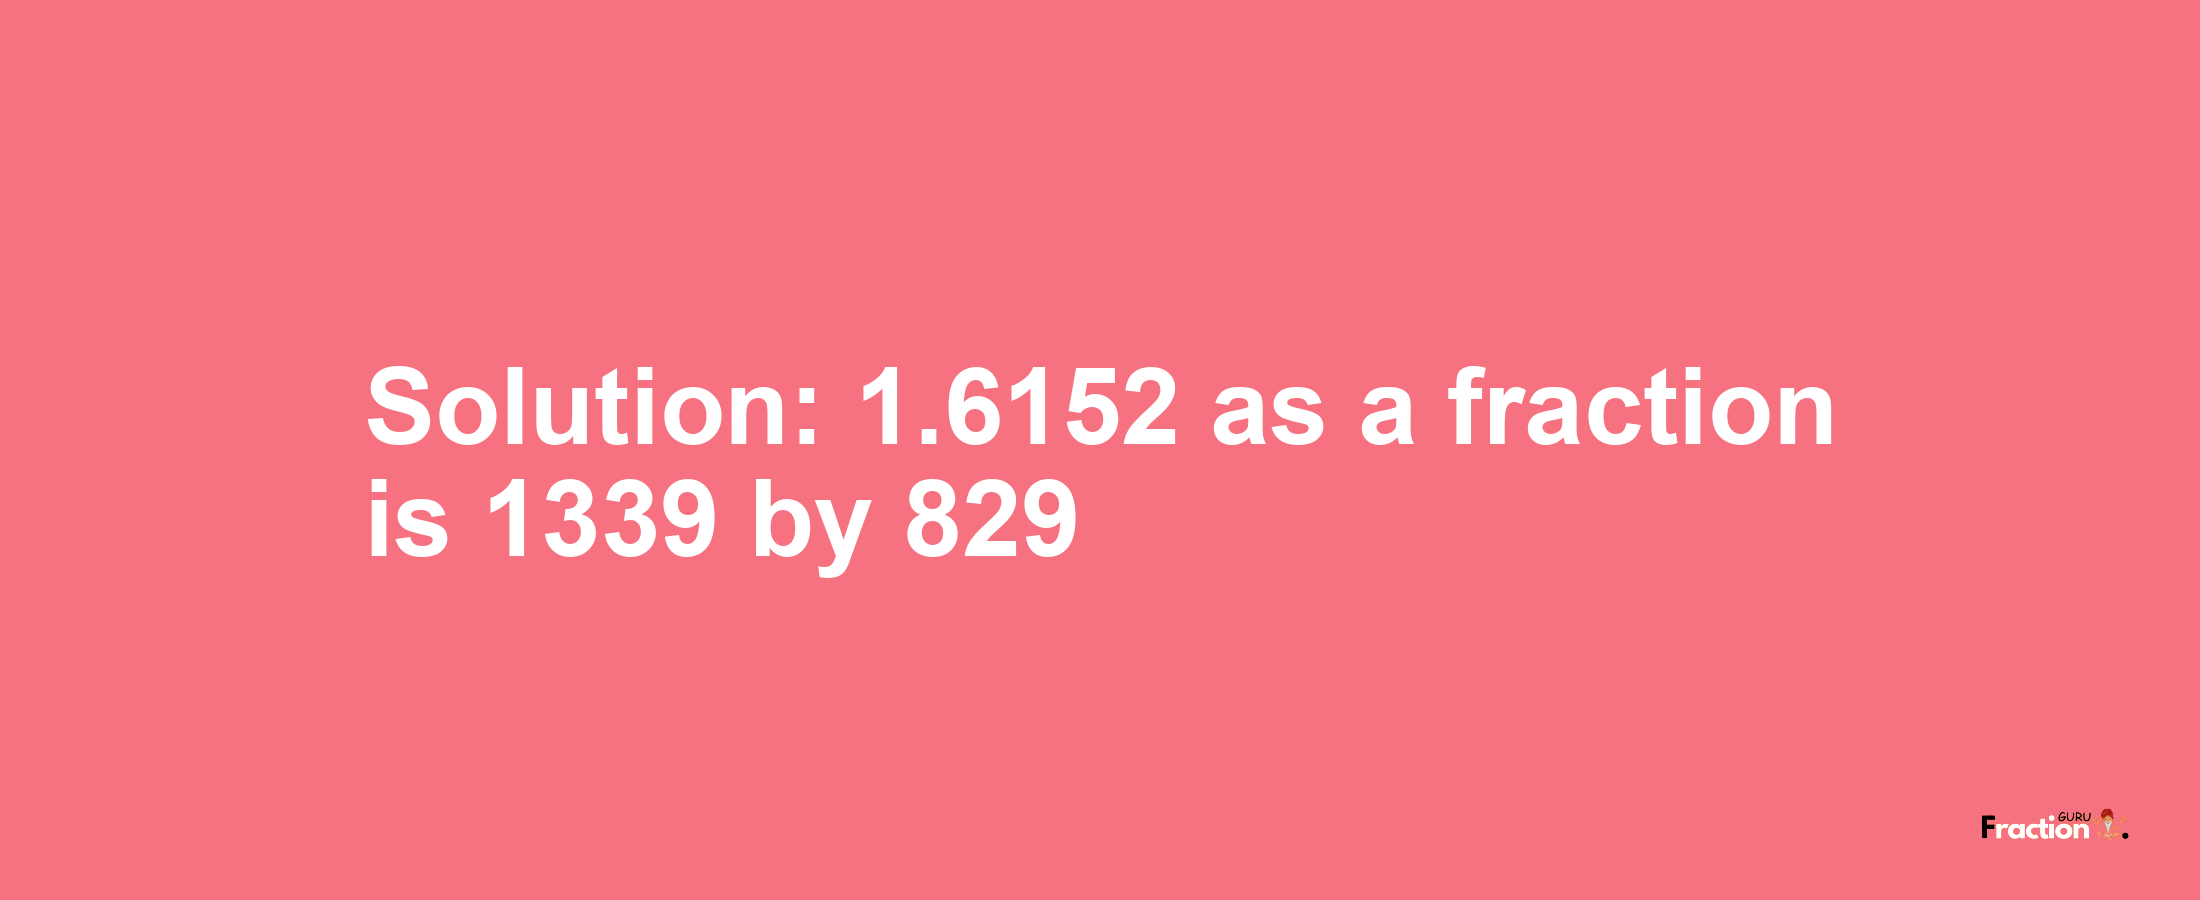 Solution:1.6152 as a fraction is 1339/829